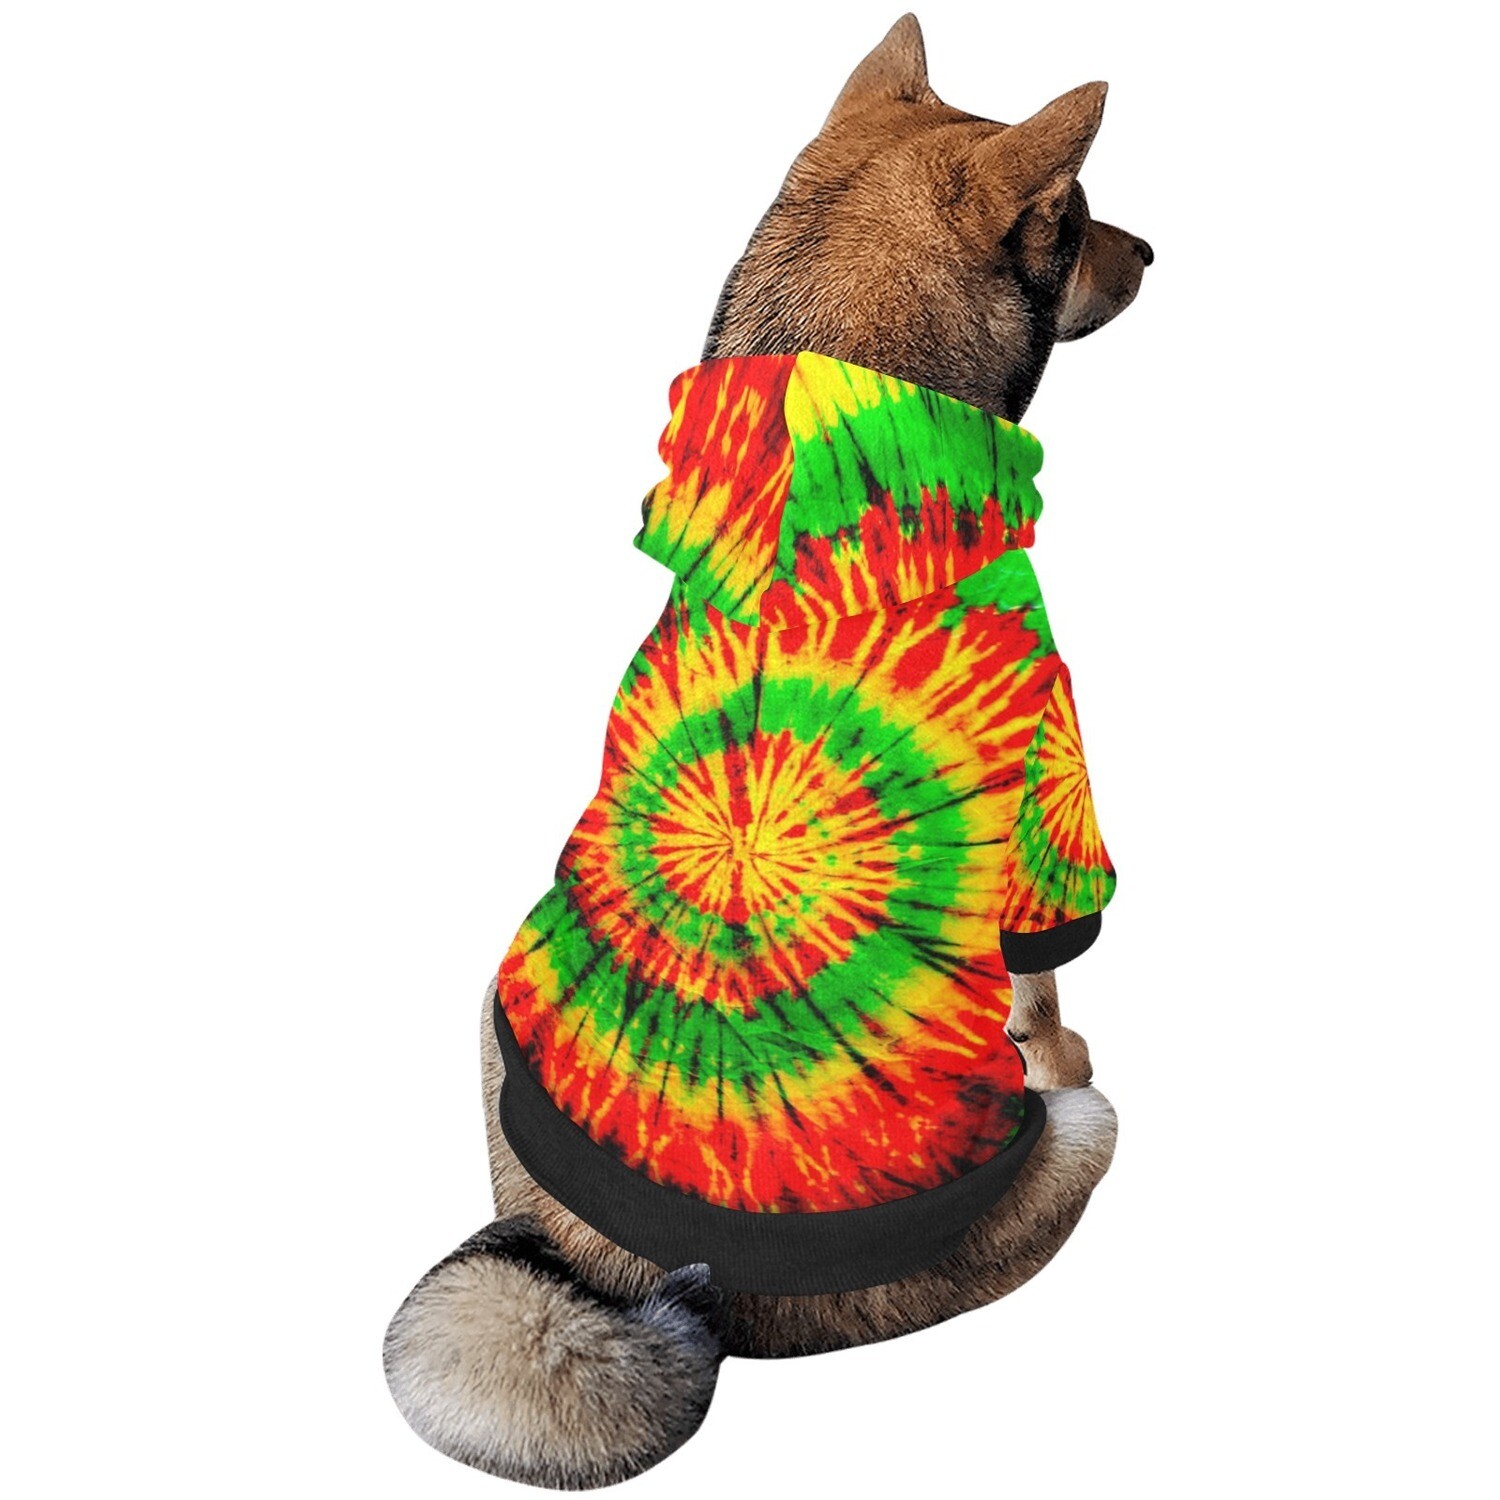 🐕☮︎ Dog Hoodie rasta Tie dye, Hippie, dog Sweater, Dog clothes, Dog clothing, 6 sizes XS to 2XL, Gift for dogs